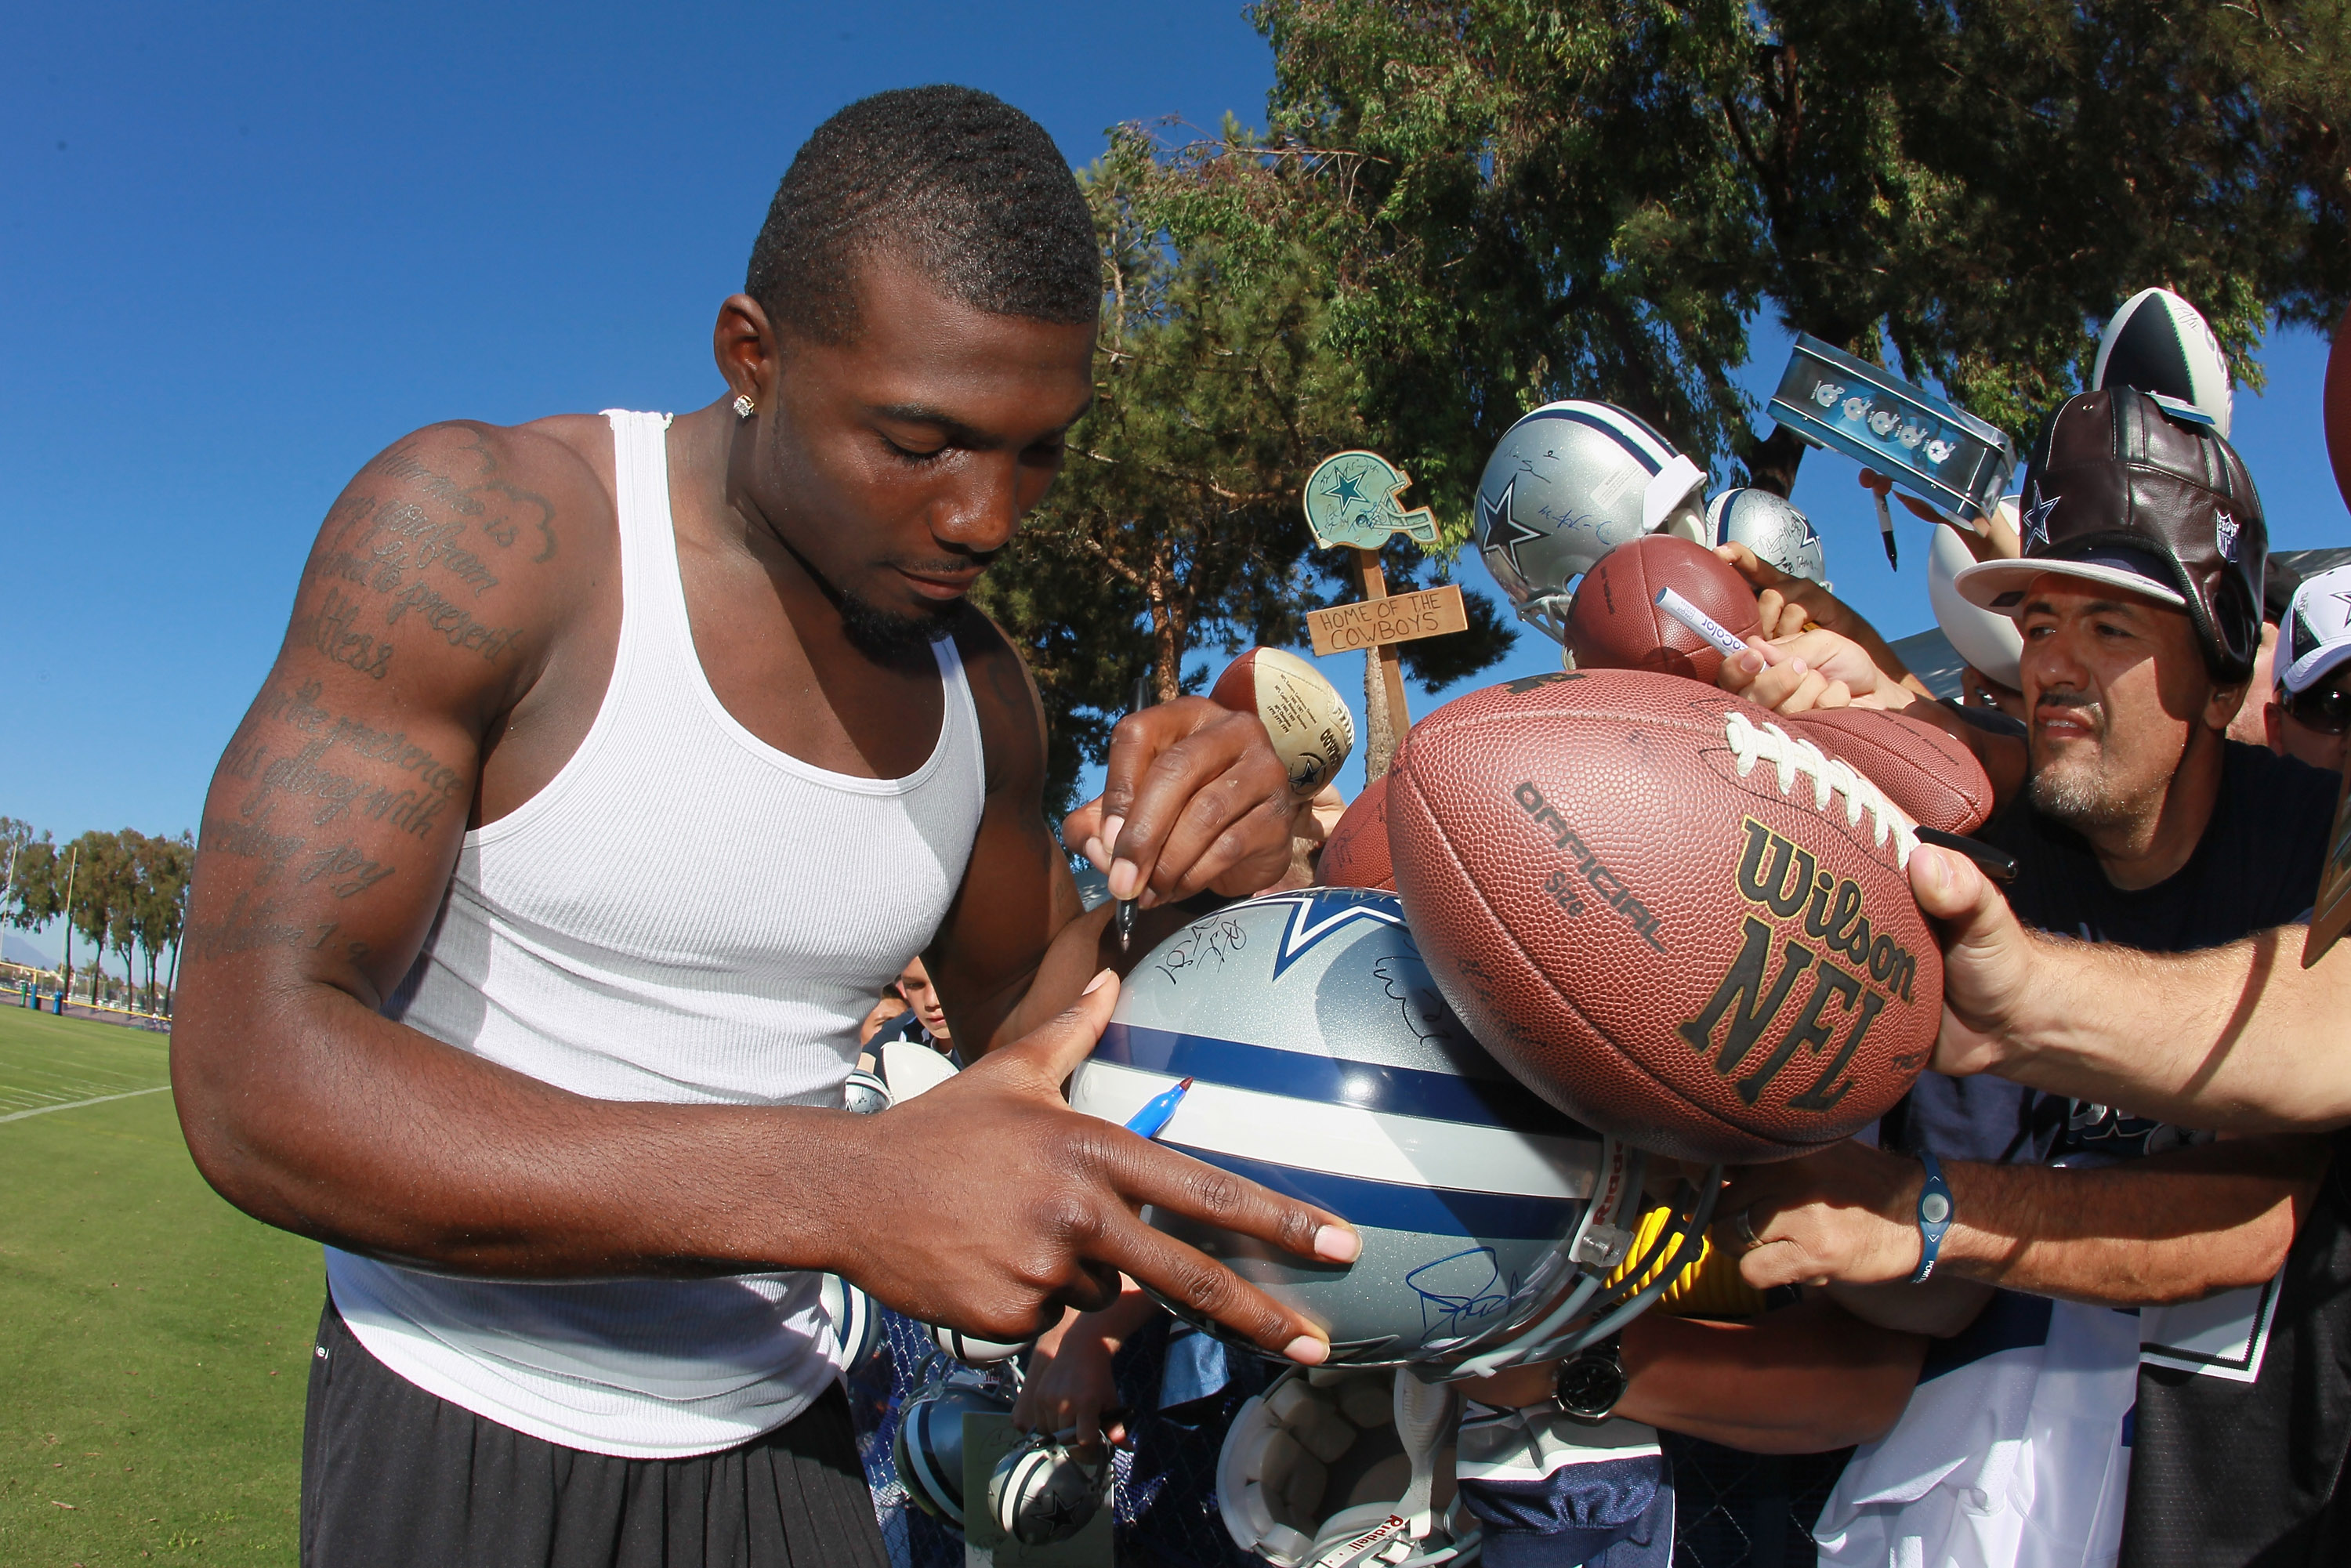 OXNARD, CA - AUGUST 14:  Wide receiver Dez Bryant #88 signs autographs for fans during Dallas Cowboys Training Camp at the Marriott Residence Inn Oxnard River Ridge on August 14, 2010 in Oxnard, California.  (Photo by Jeff Gross/Getty Images)